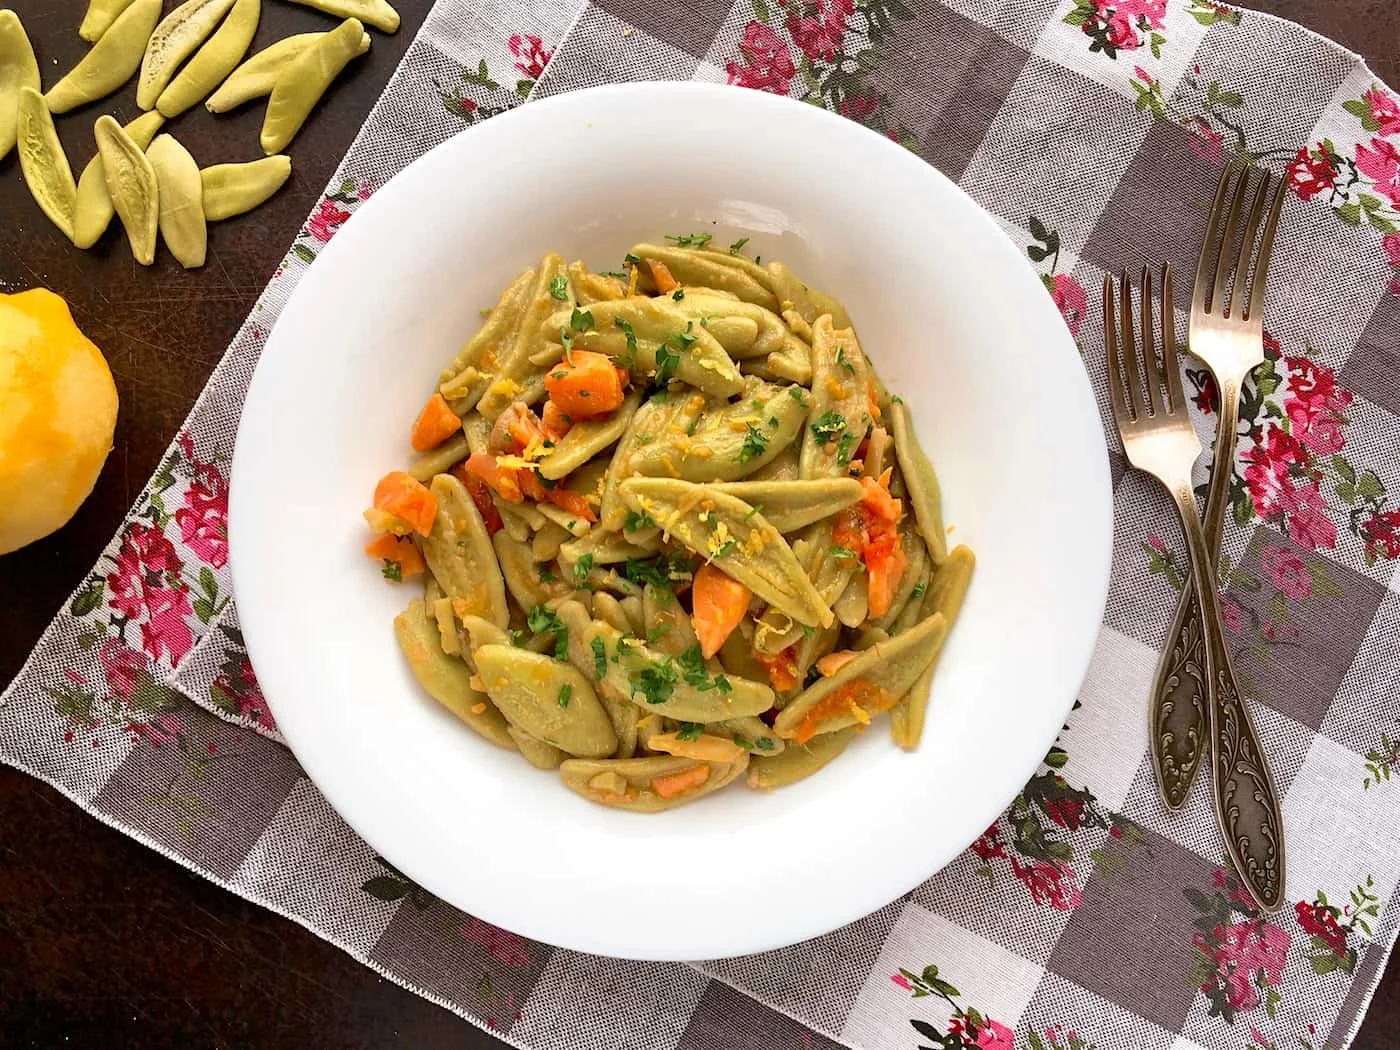 Foglie d'ulivo - Olive Leaves Pasta with Zesty Lemon Infused Salmon